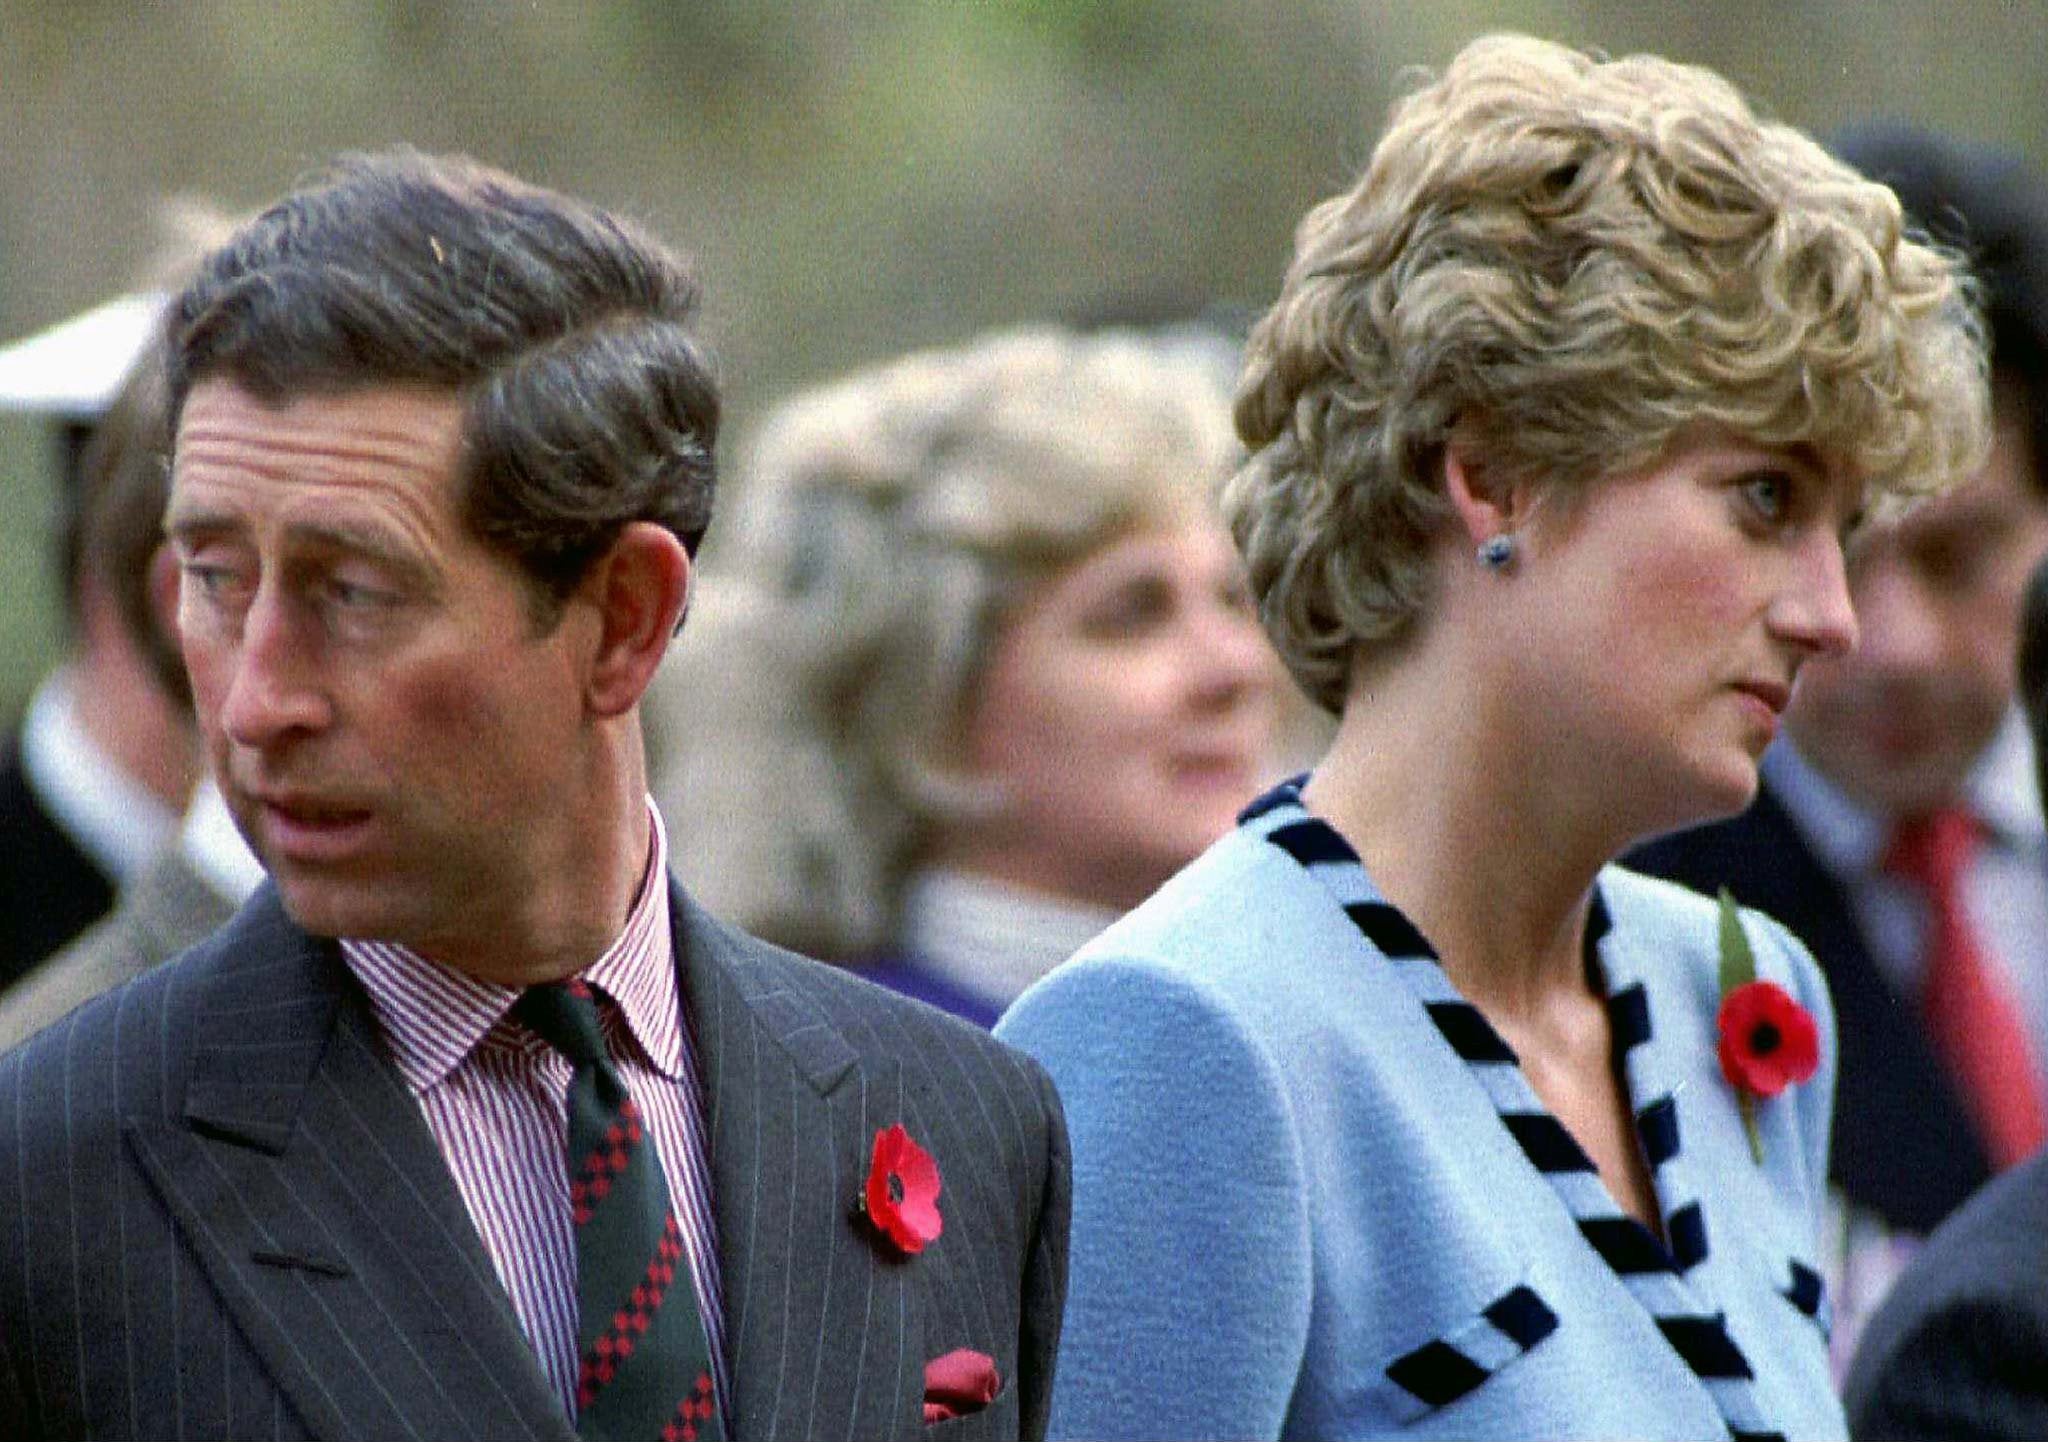 The marriage of Diana and Charles was laid bare in a new documentary last night